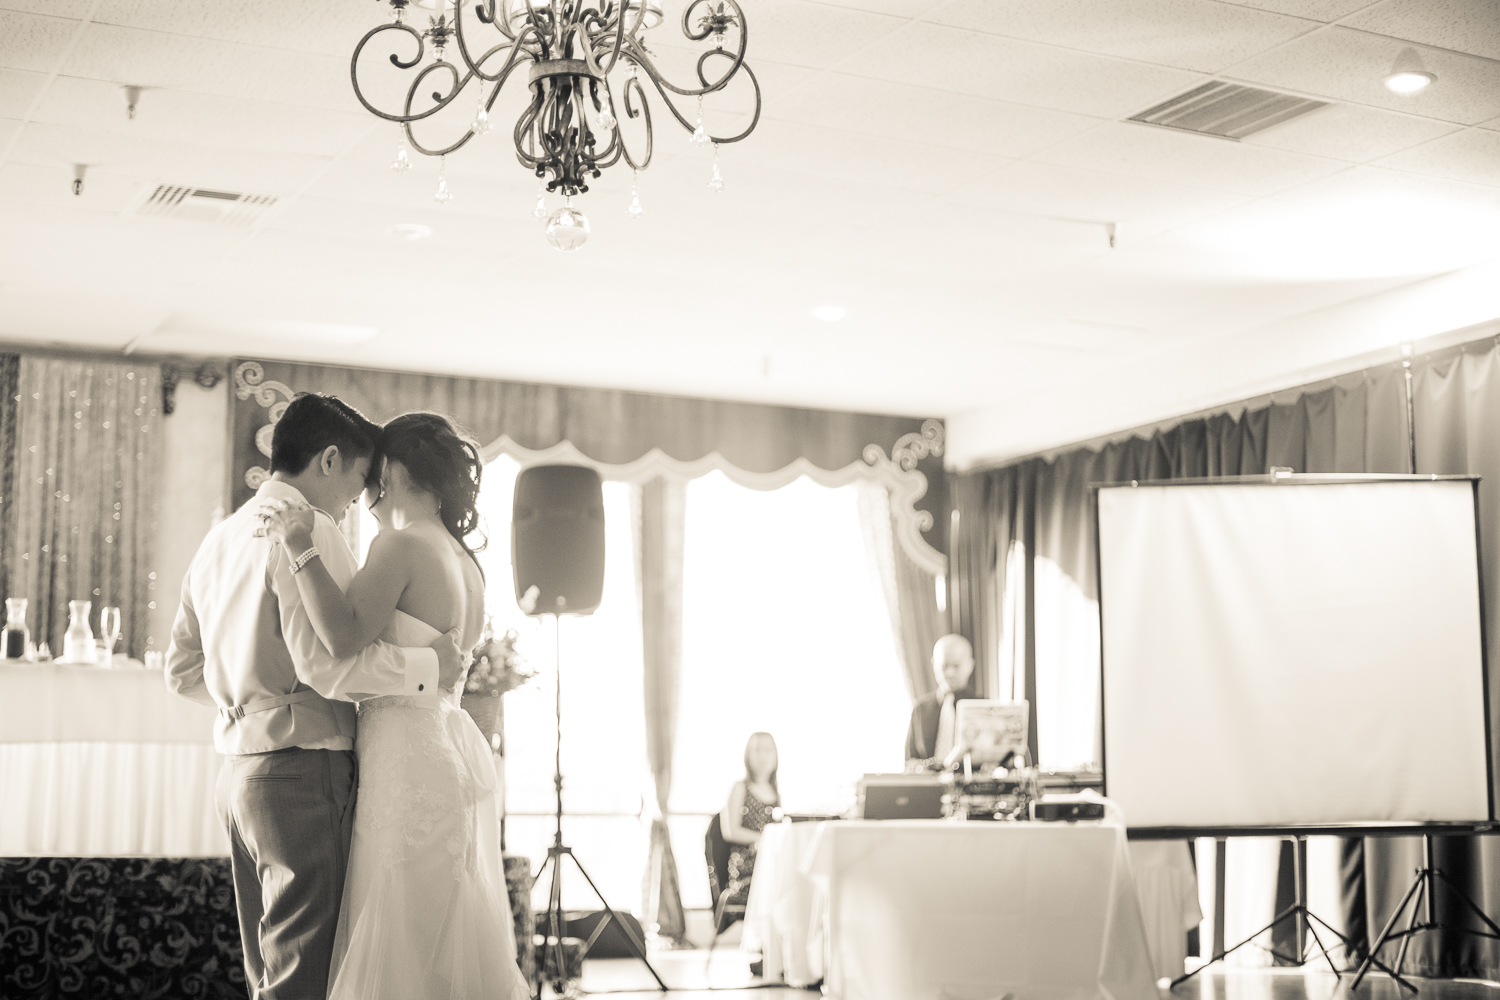 Melissa & Kenny Wedding Preview: The First Dance | Royal Vista Golf Course in Chino Hills, CA